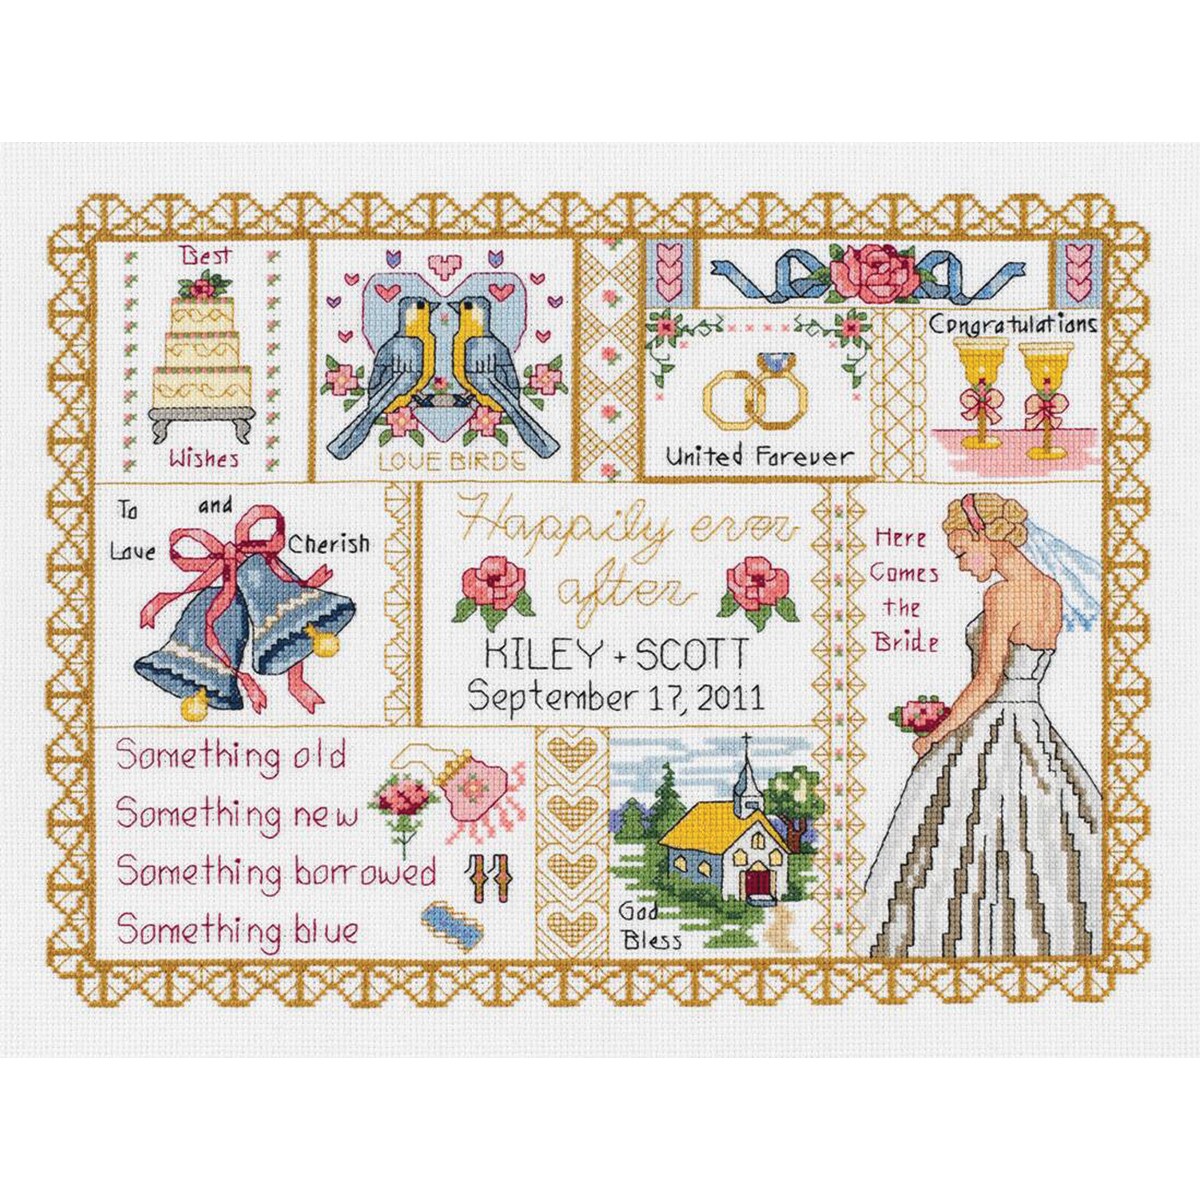 Wedding Collage Counted Cross Stitch Kit 13 1/4x10 14 Count